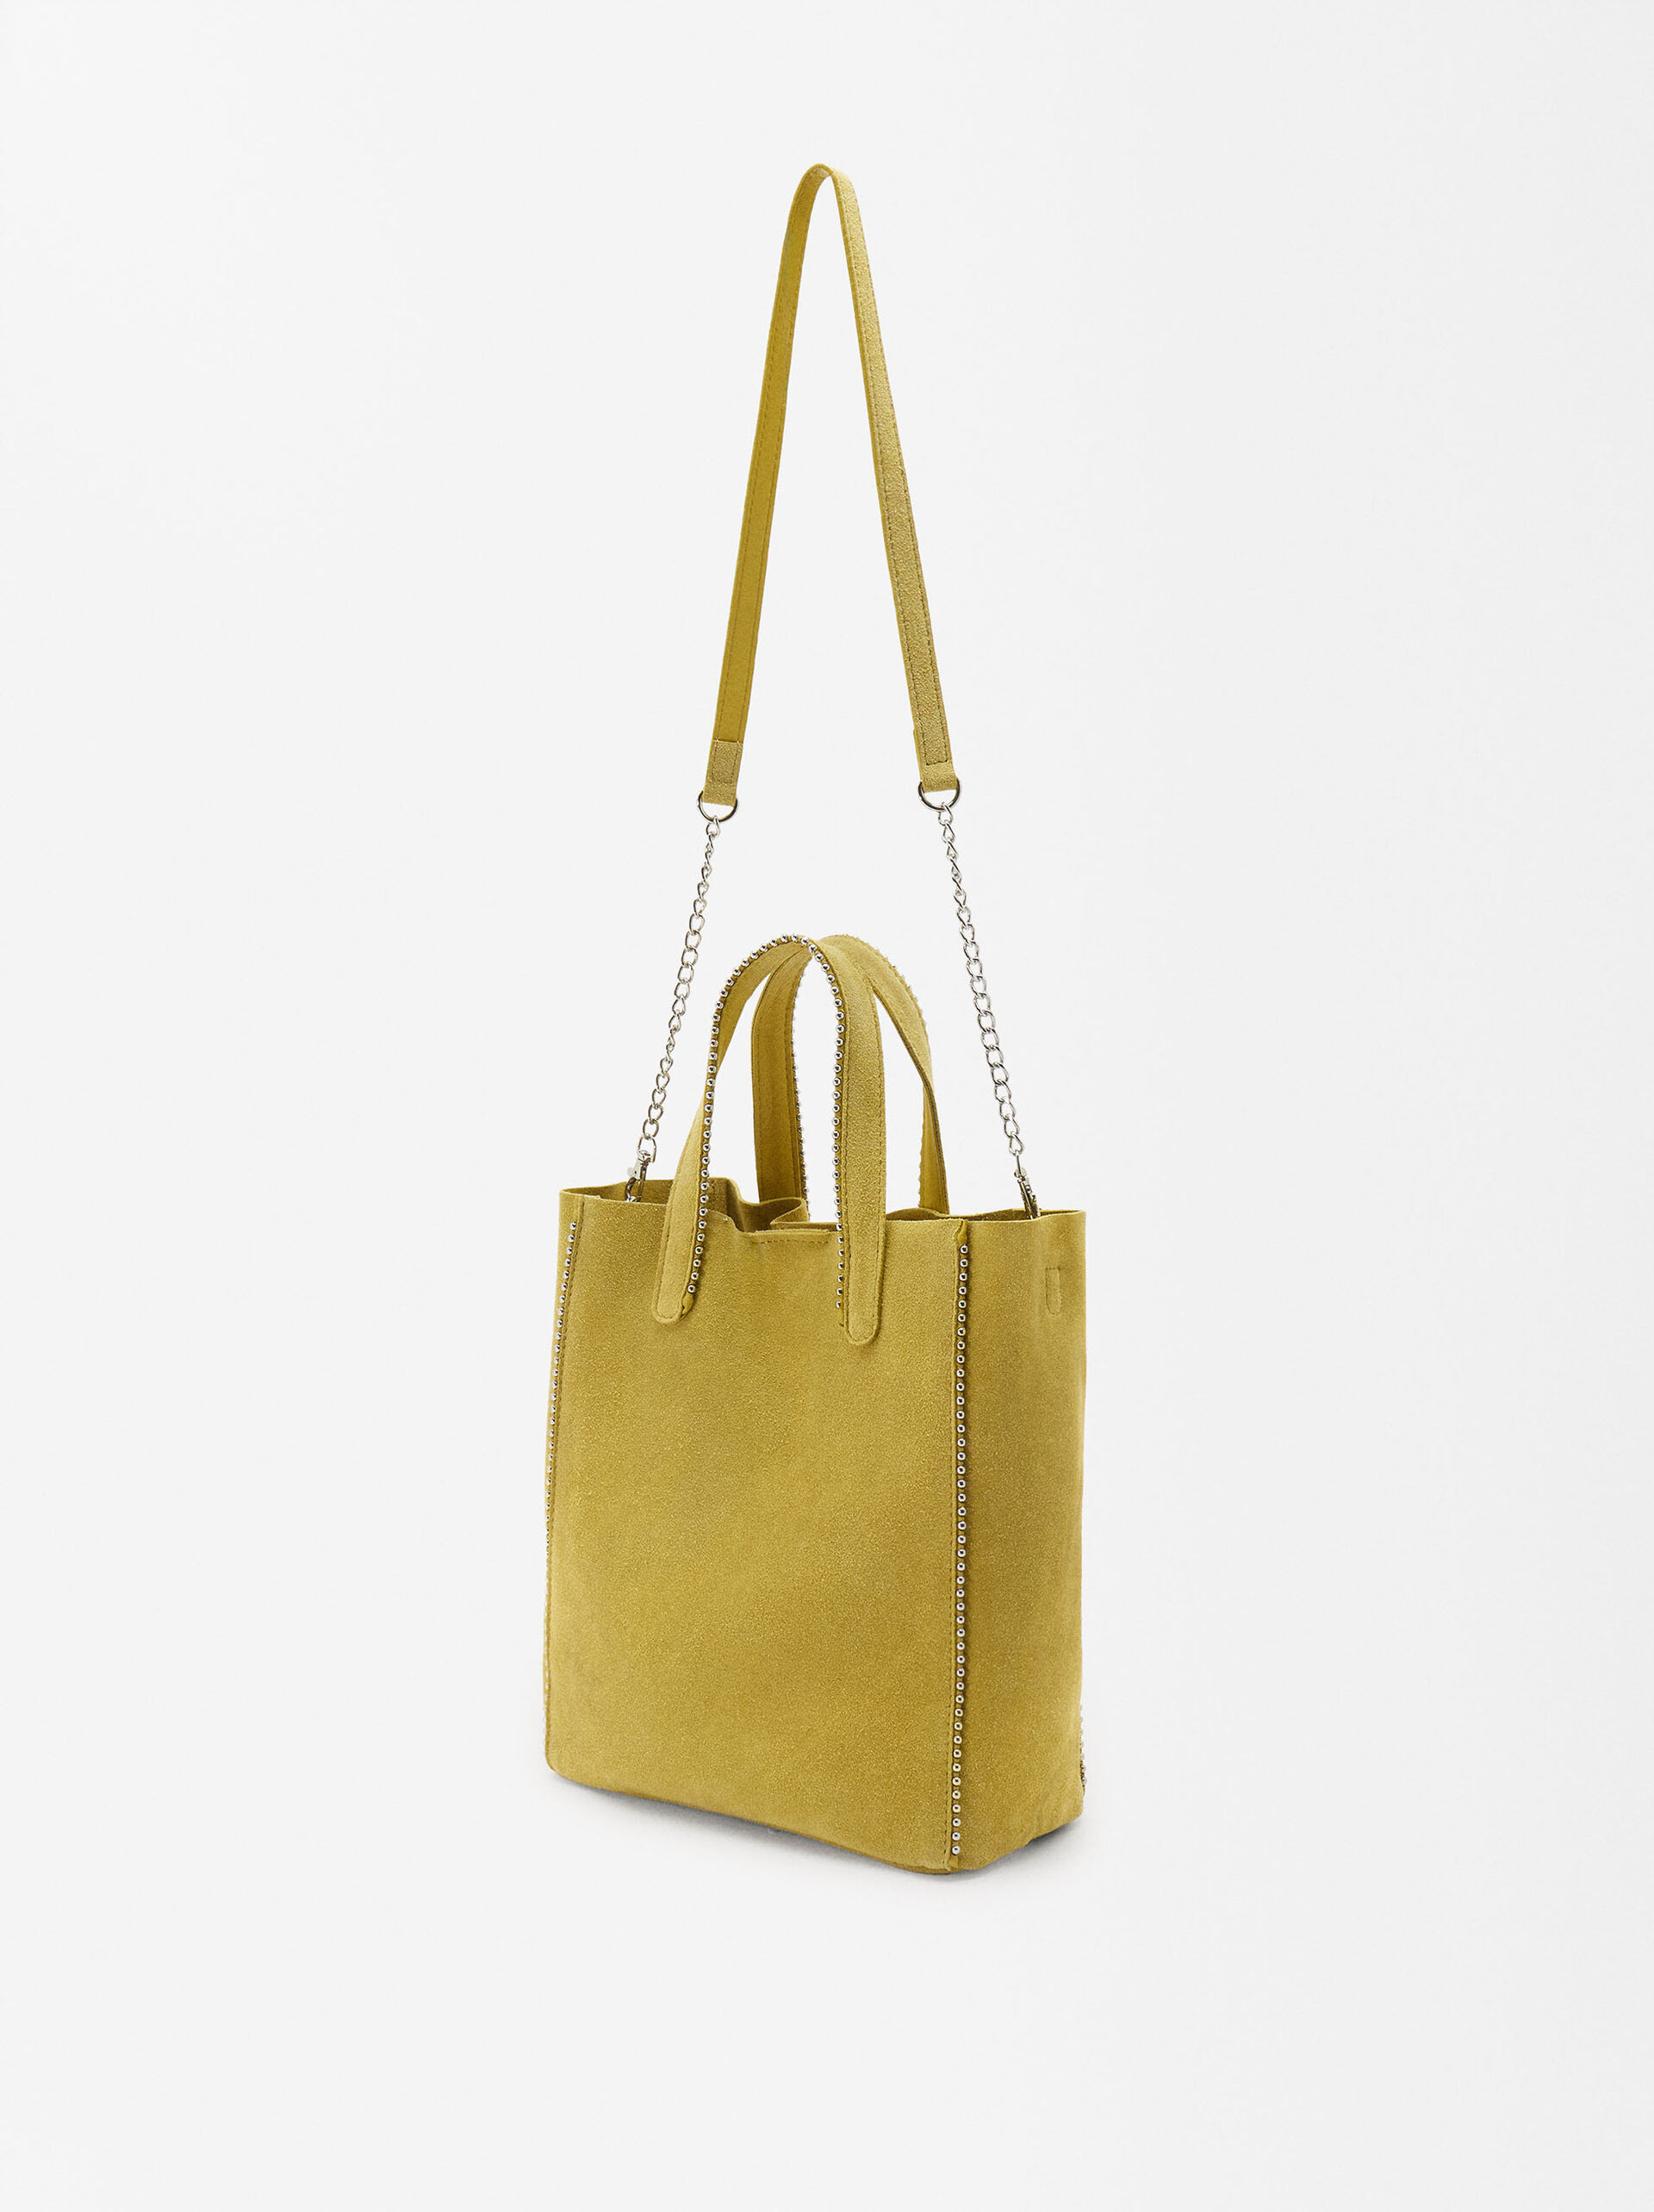 Leather Tote Bag With Pendant - Limited Edition image number 3.0